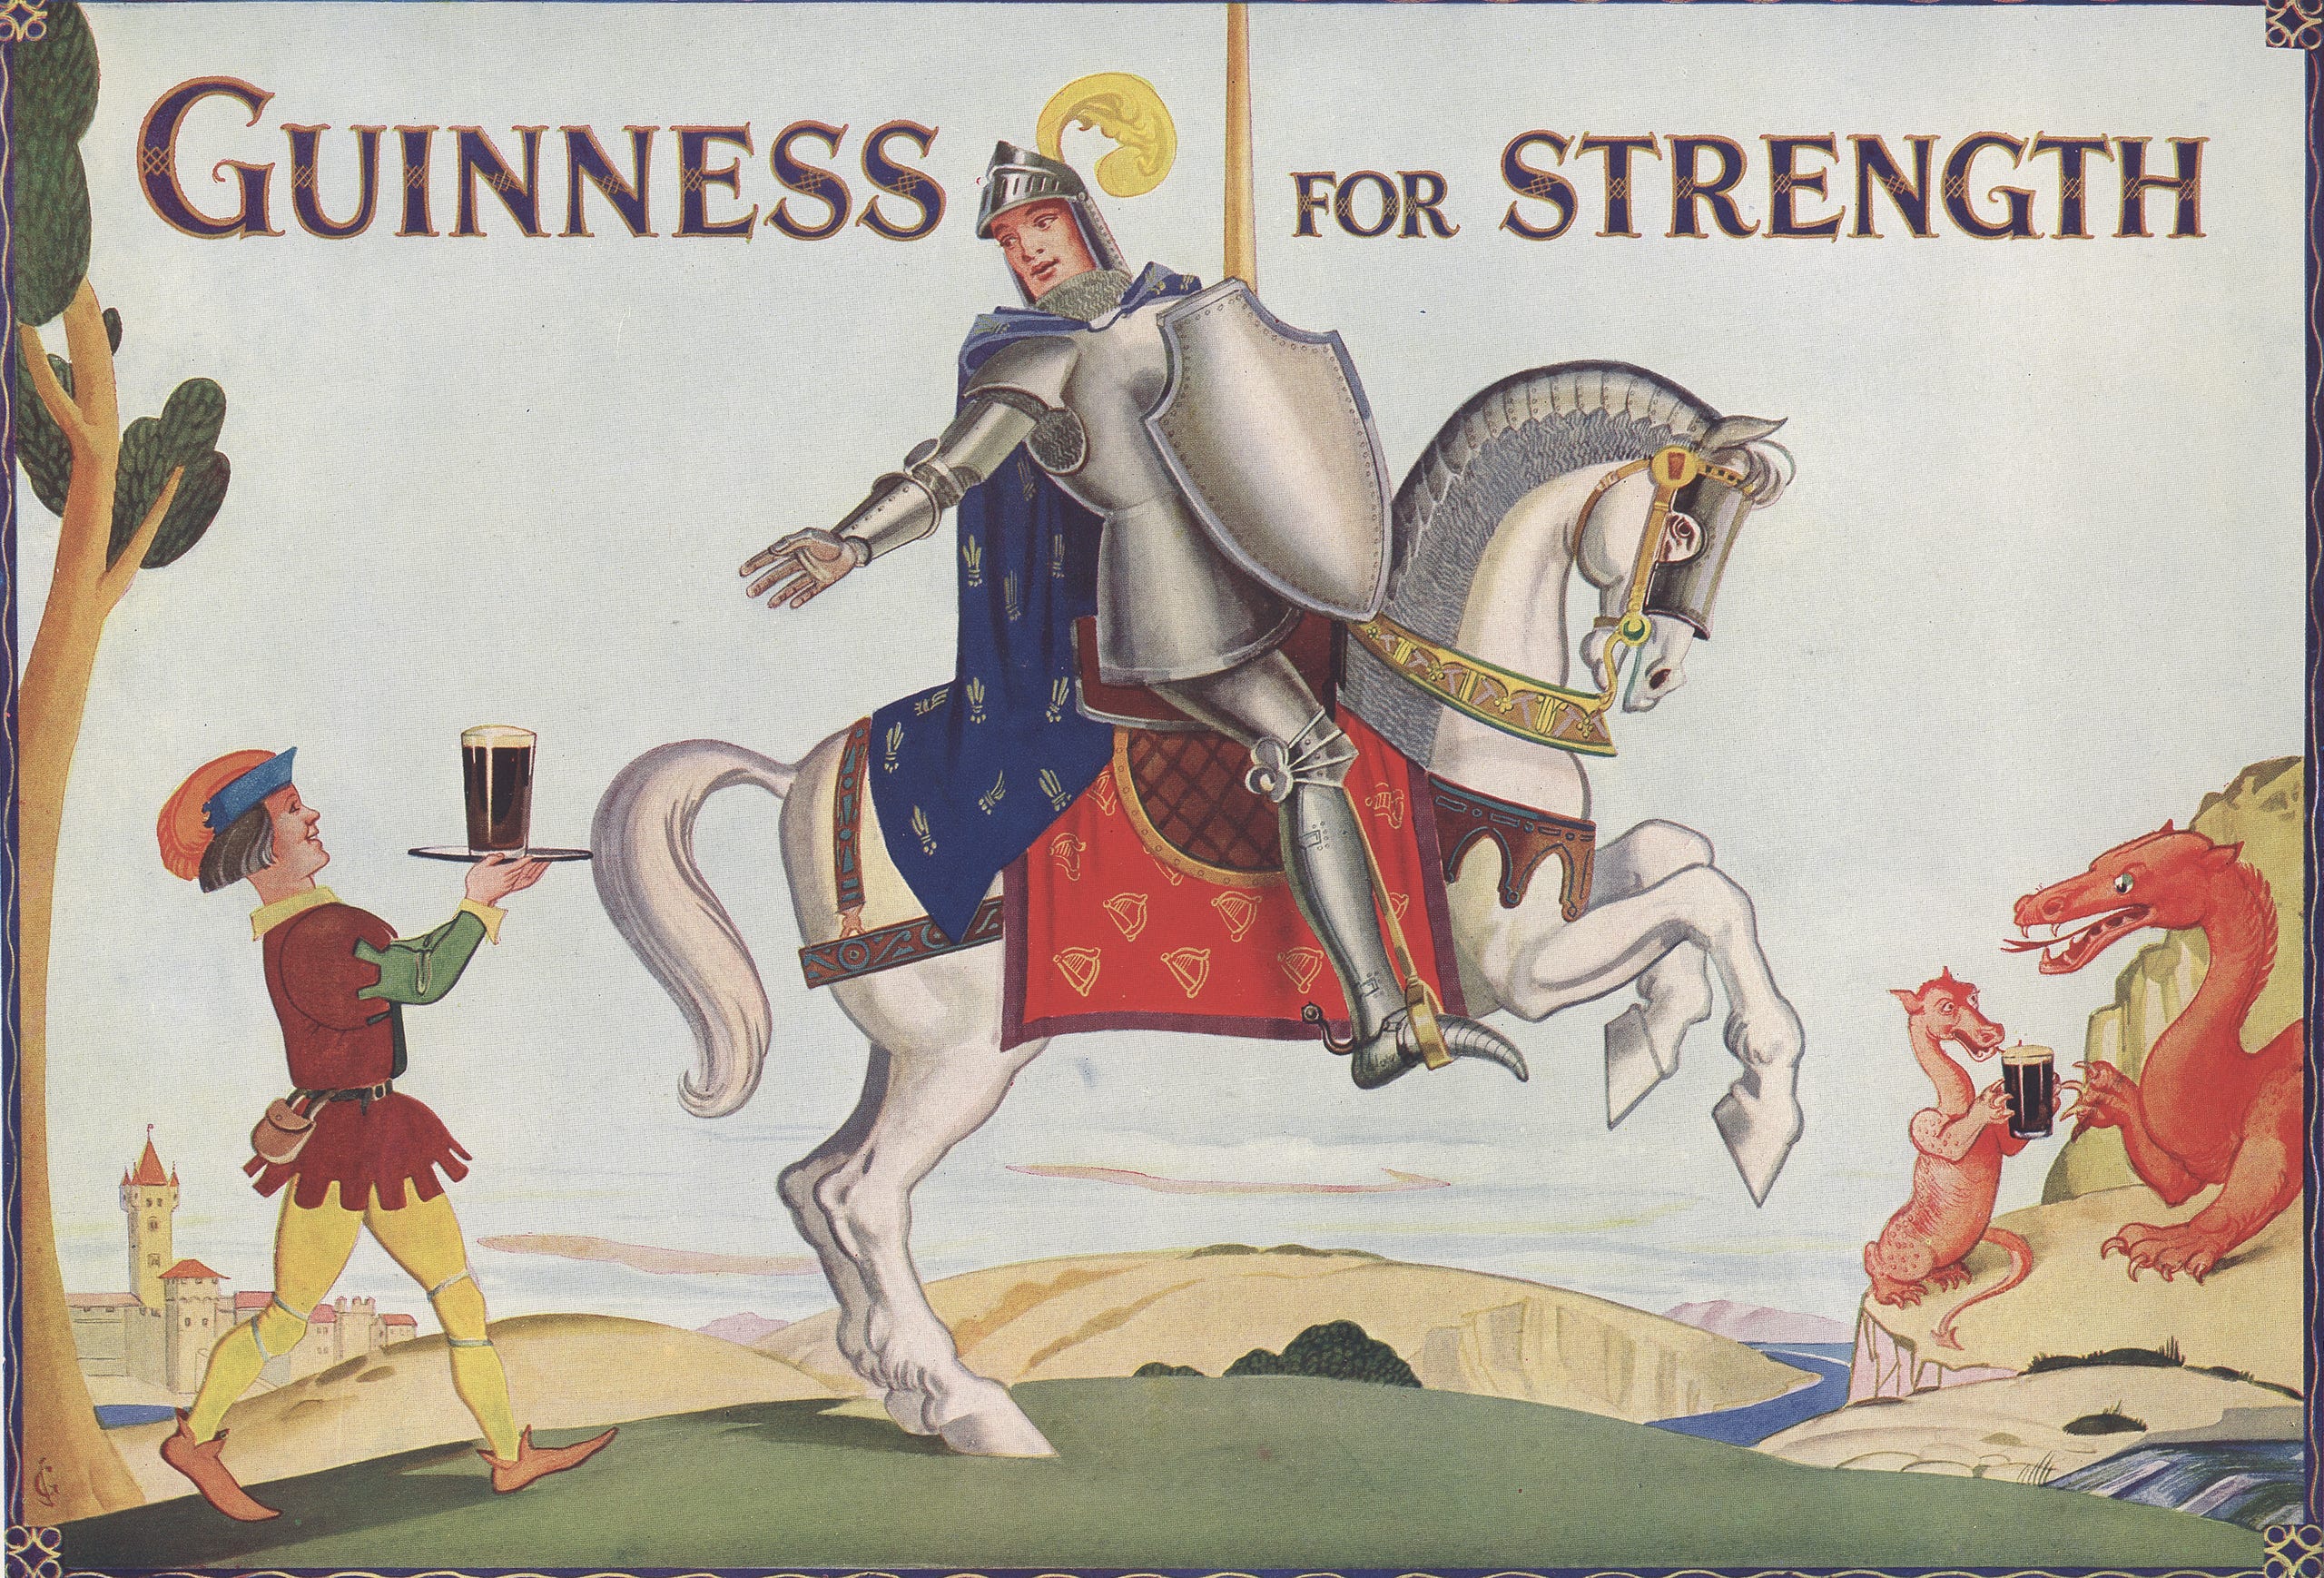 General 2560x1738 Guinness beer advertisements knight Squire dragon vintage digital art